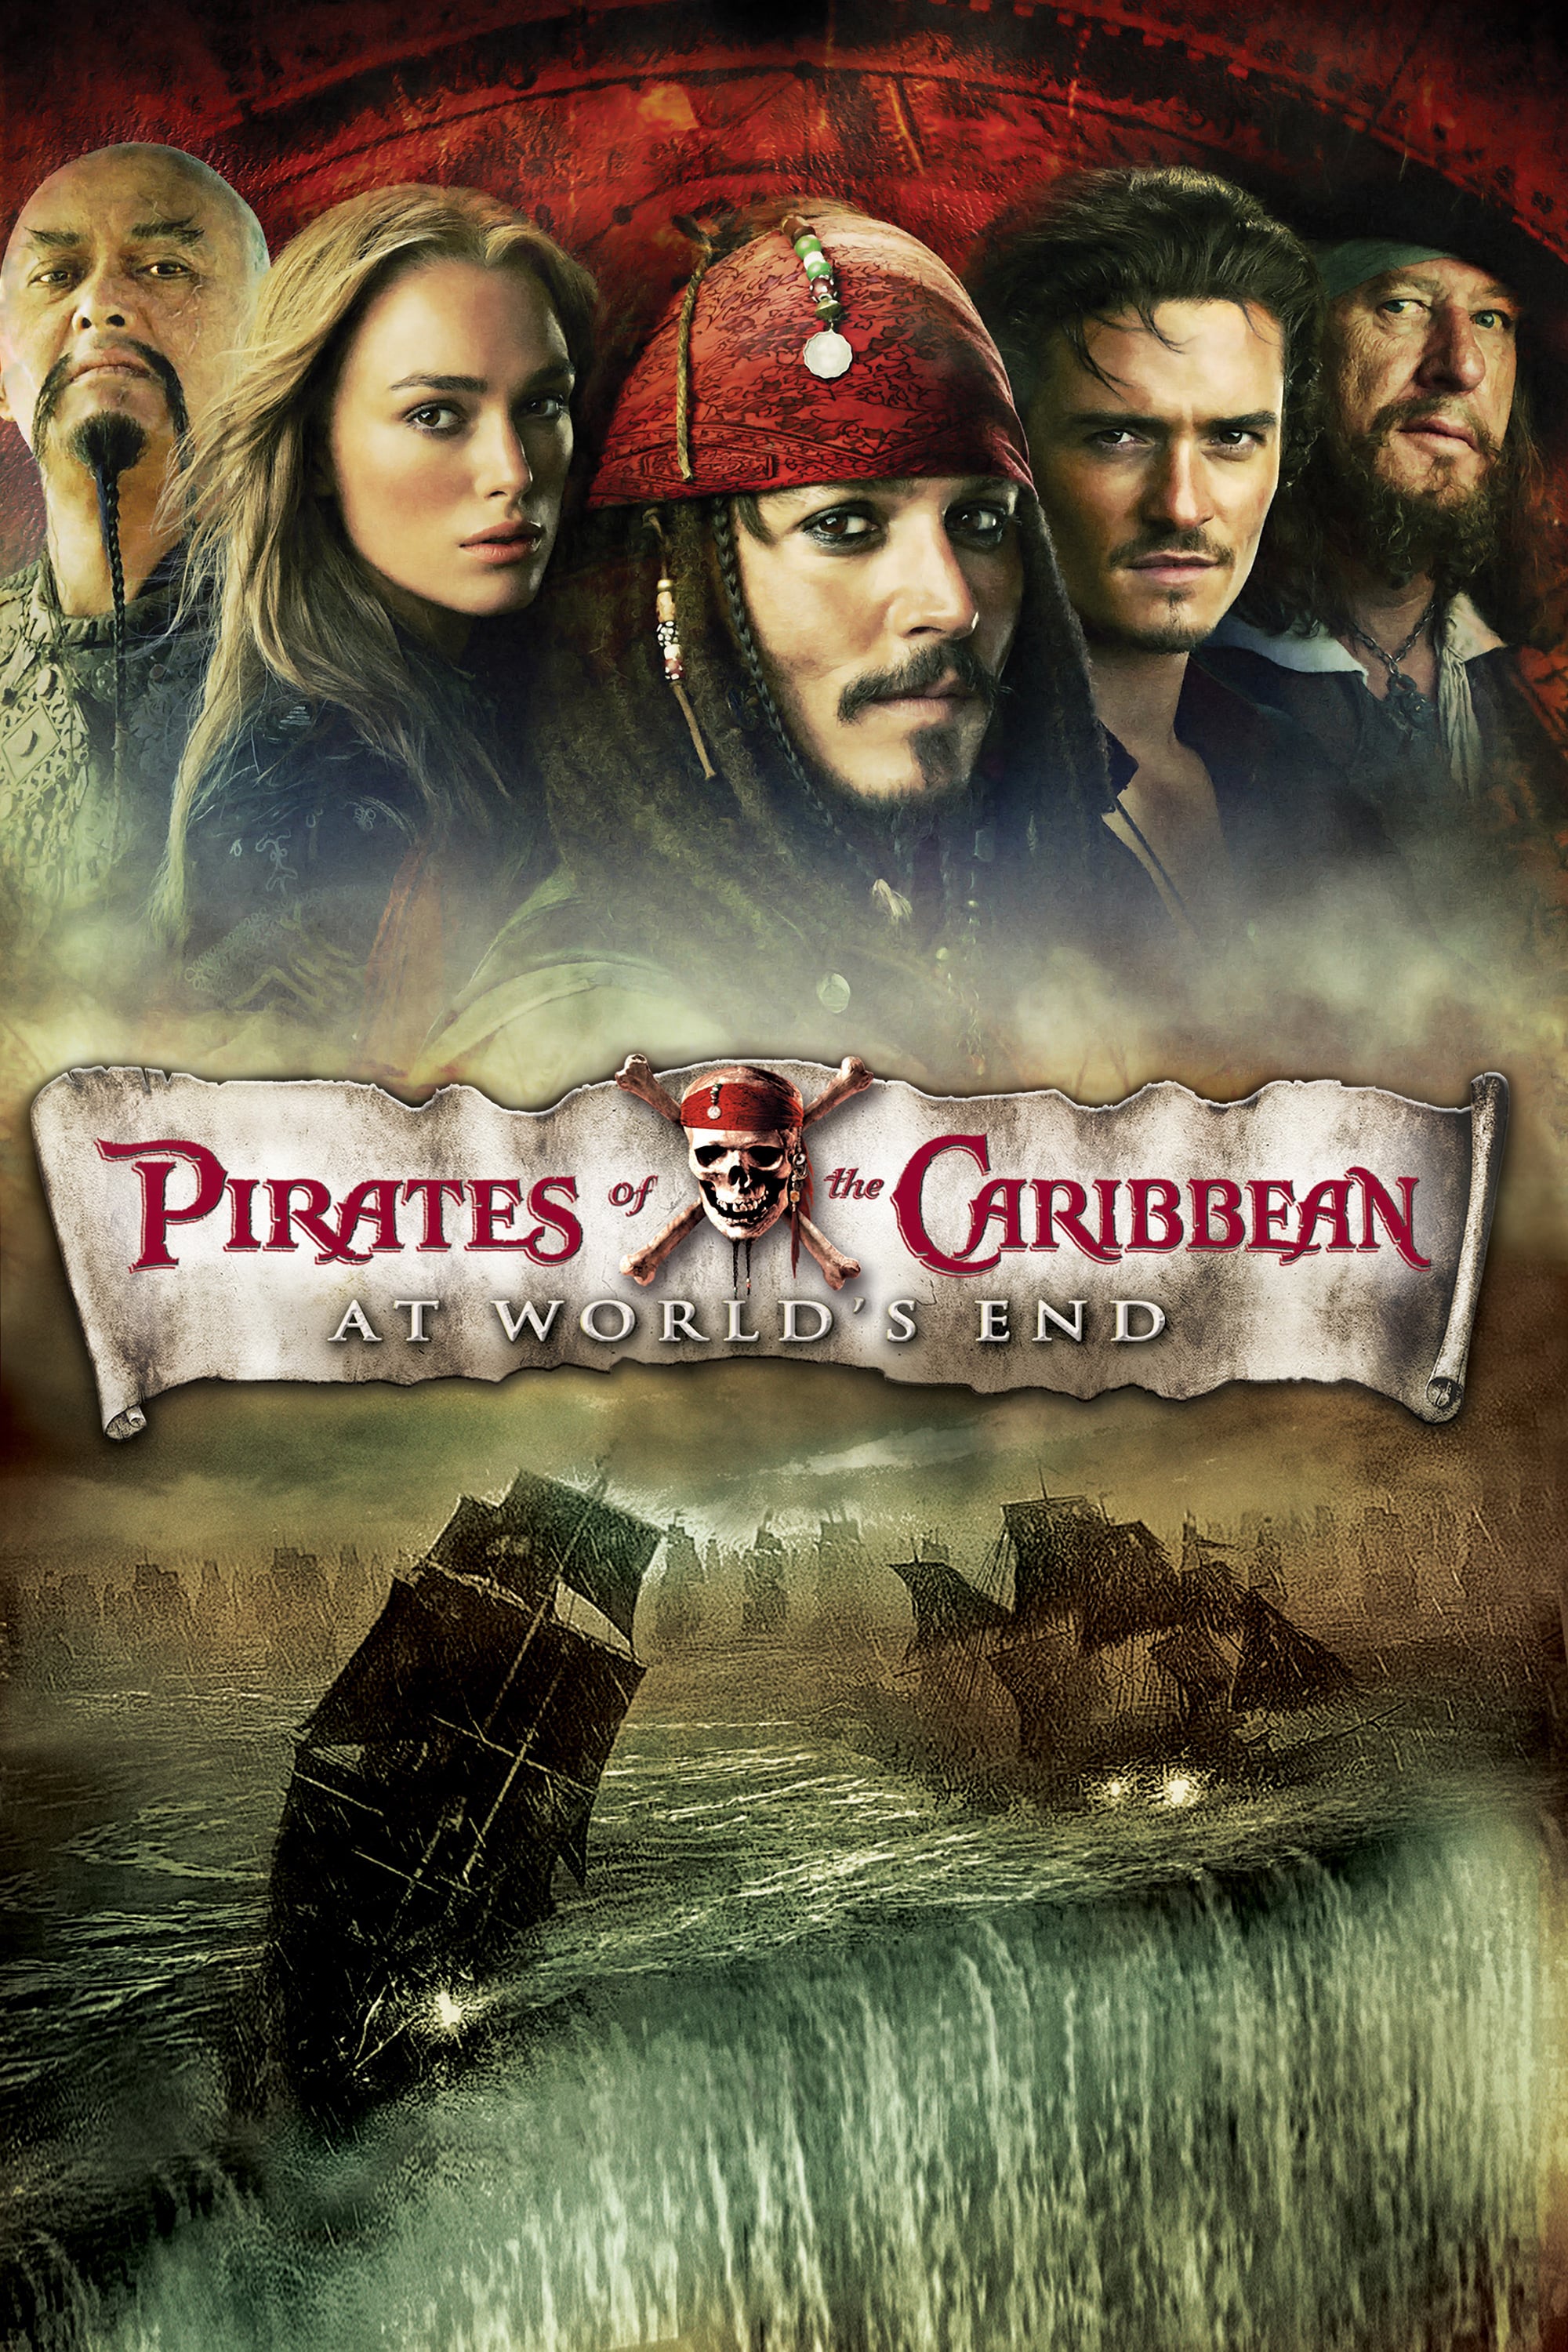 PIRATES OF THE CARIBBEAN: AT WORLDS END